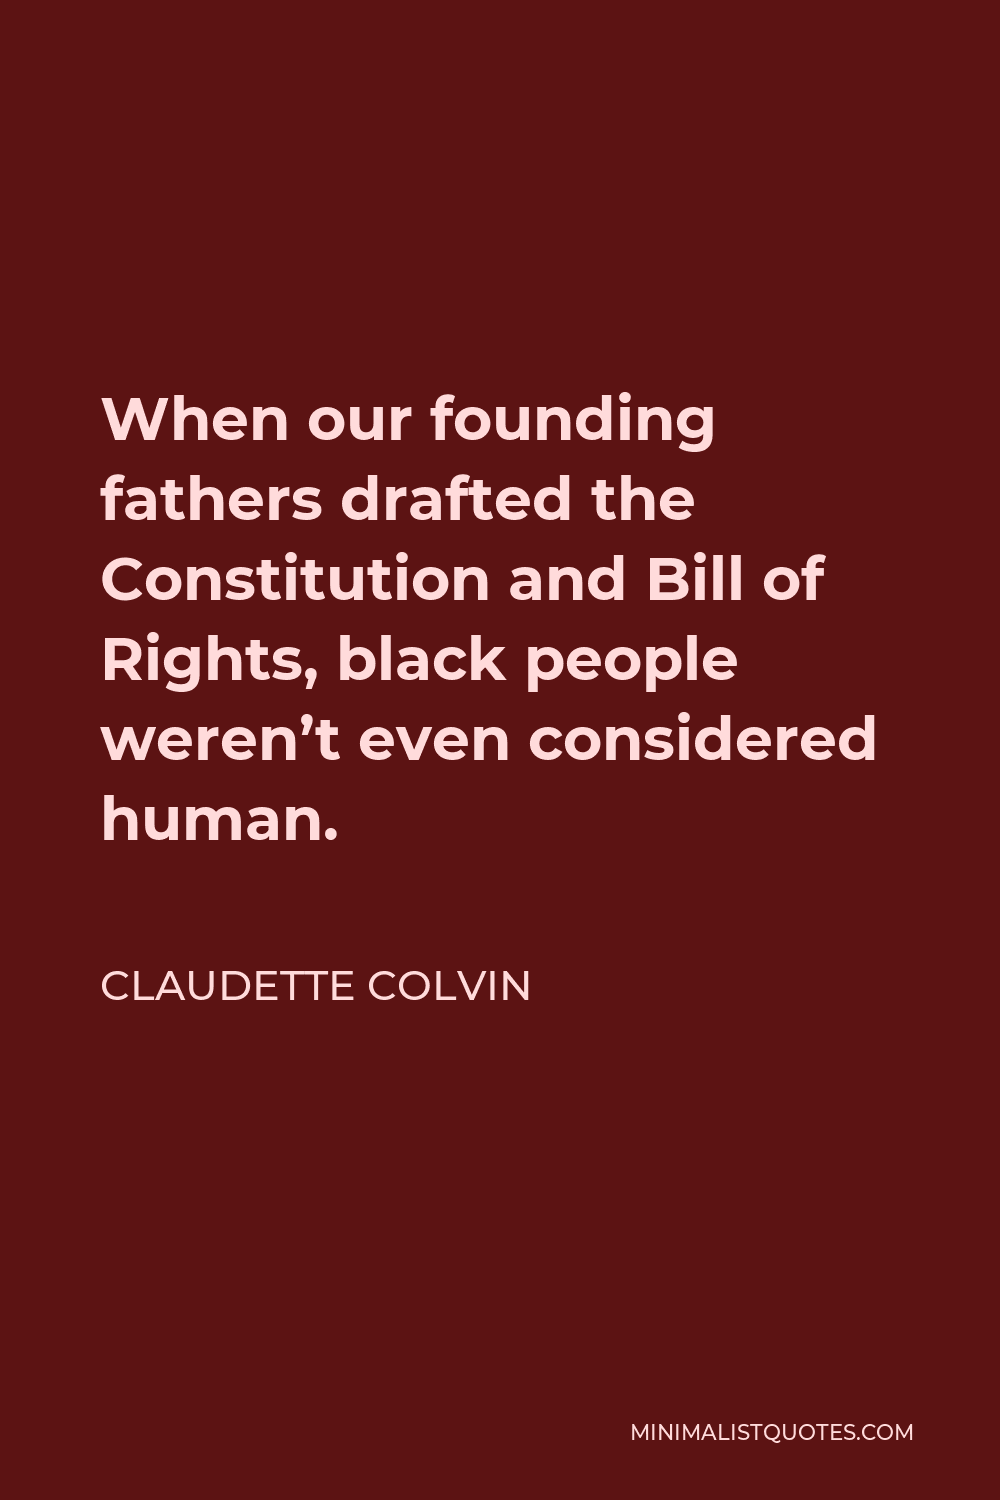 Claudette Colvin Quote - When our founding fathers drafted the Constitution and Bill of Rights, black people weren’t even considered human.